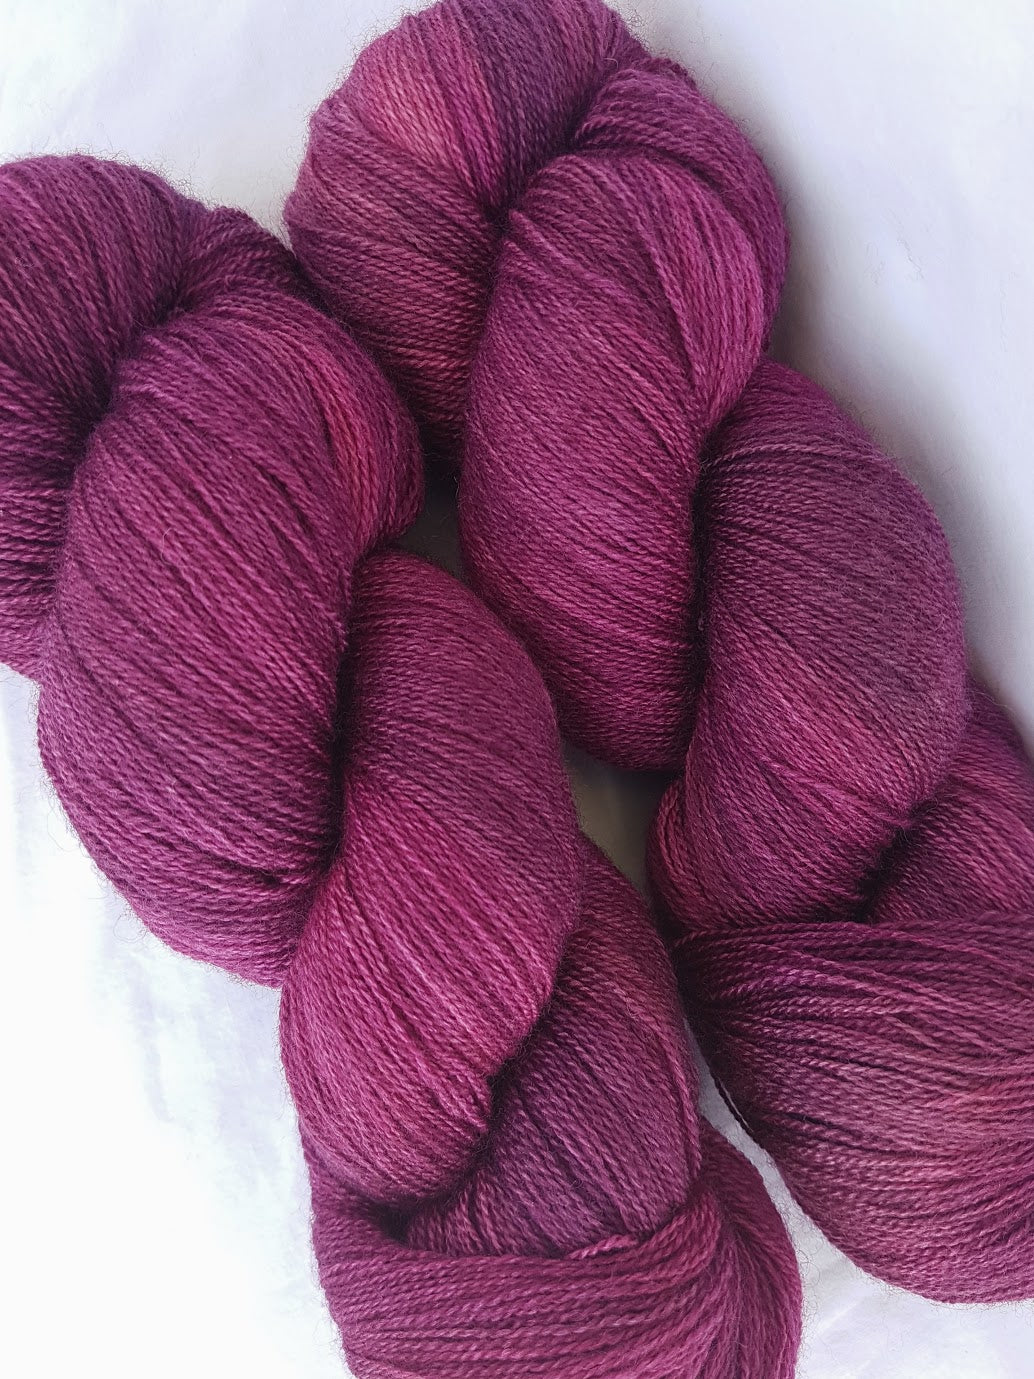 BFL/Silk Lace - Mulberry